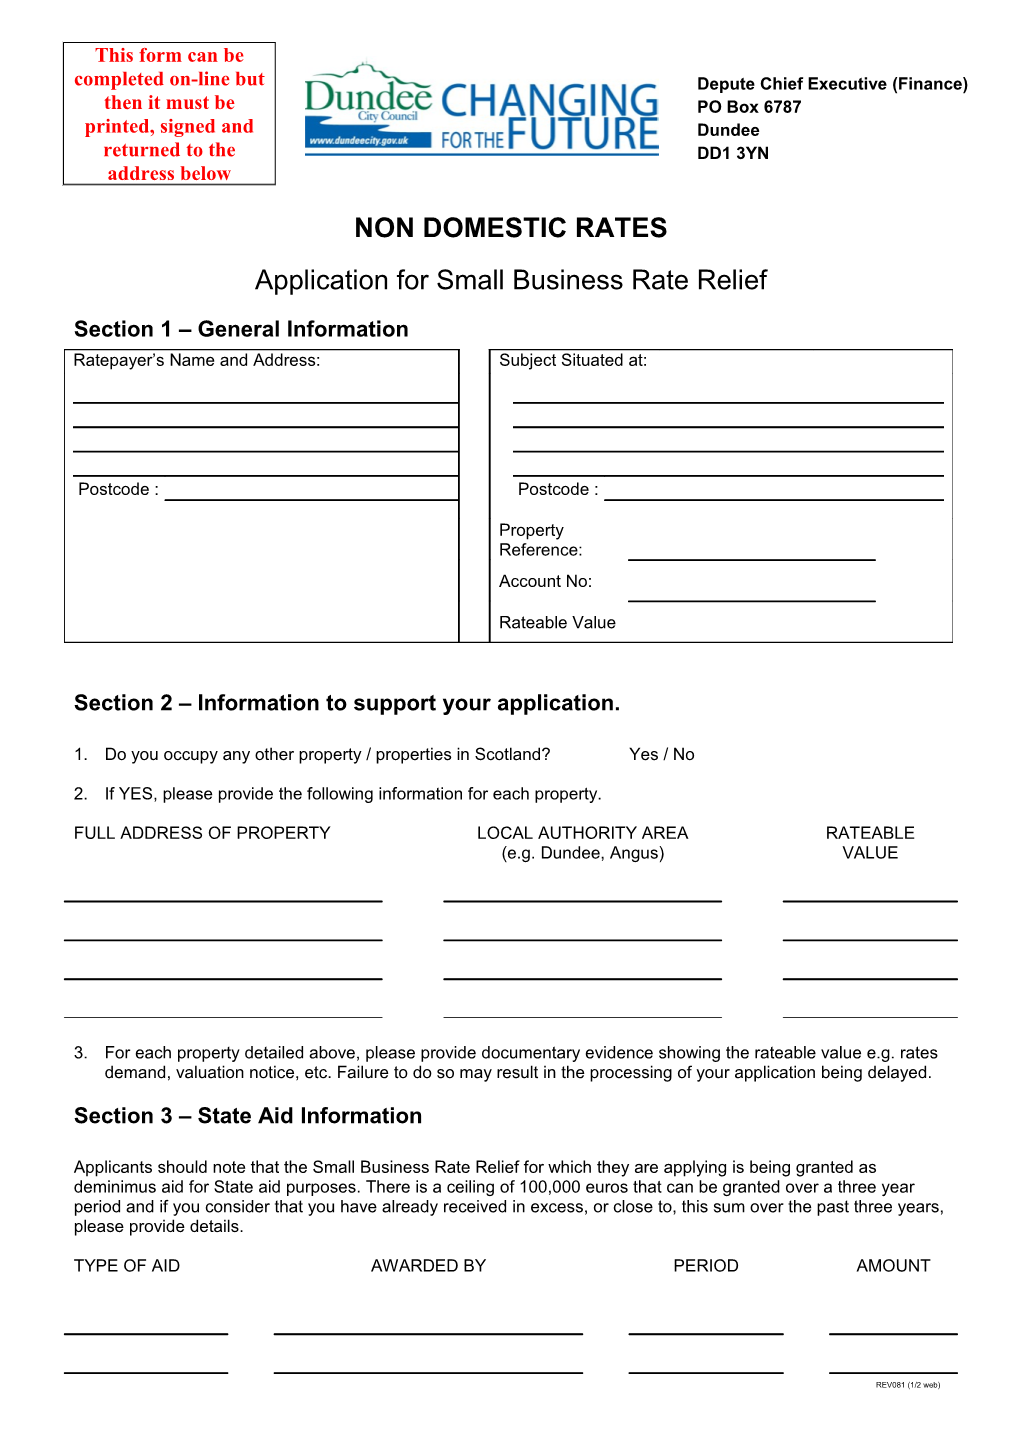 Application for Small Business Rate Relief